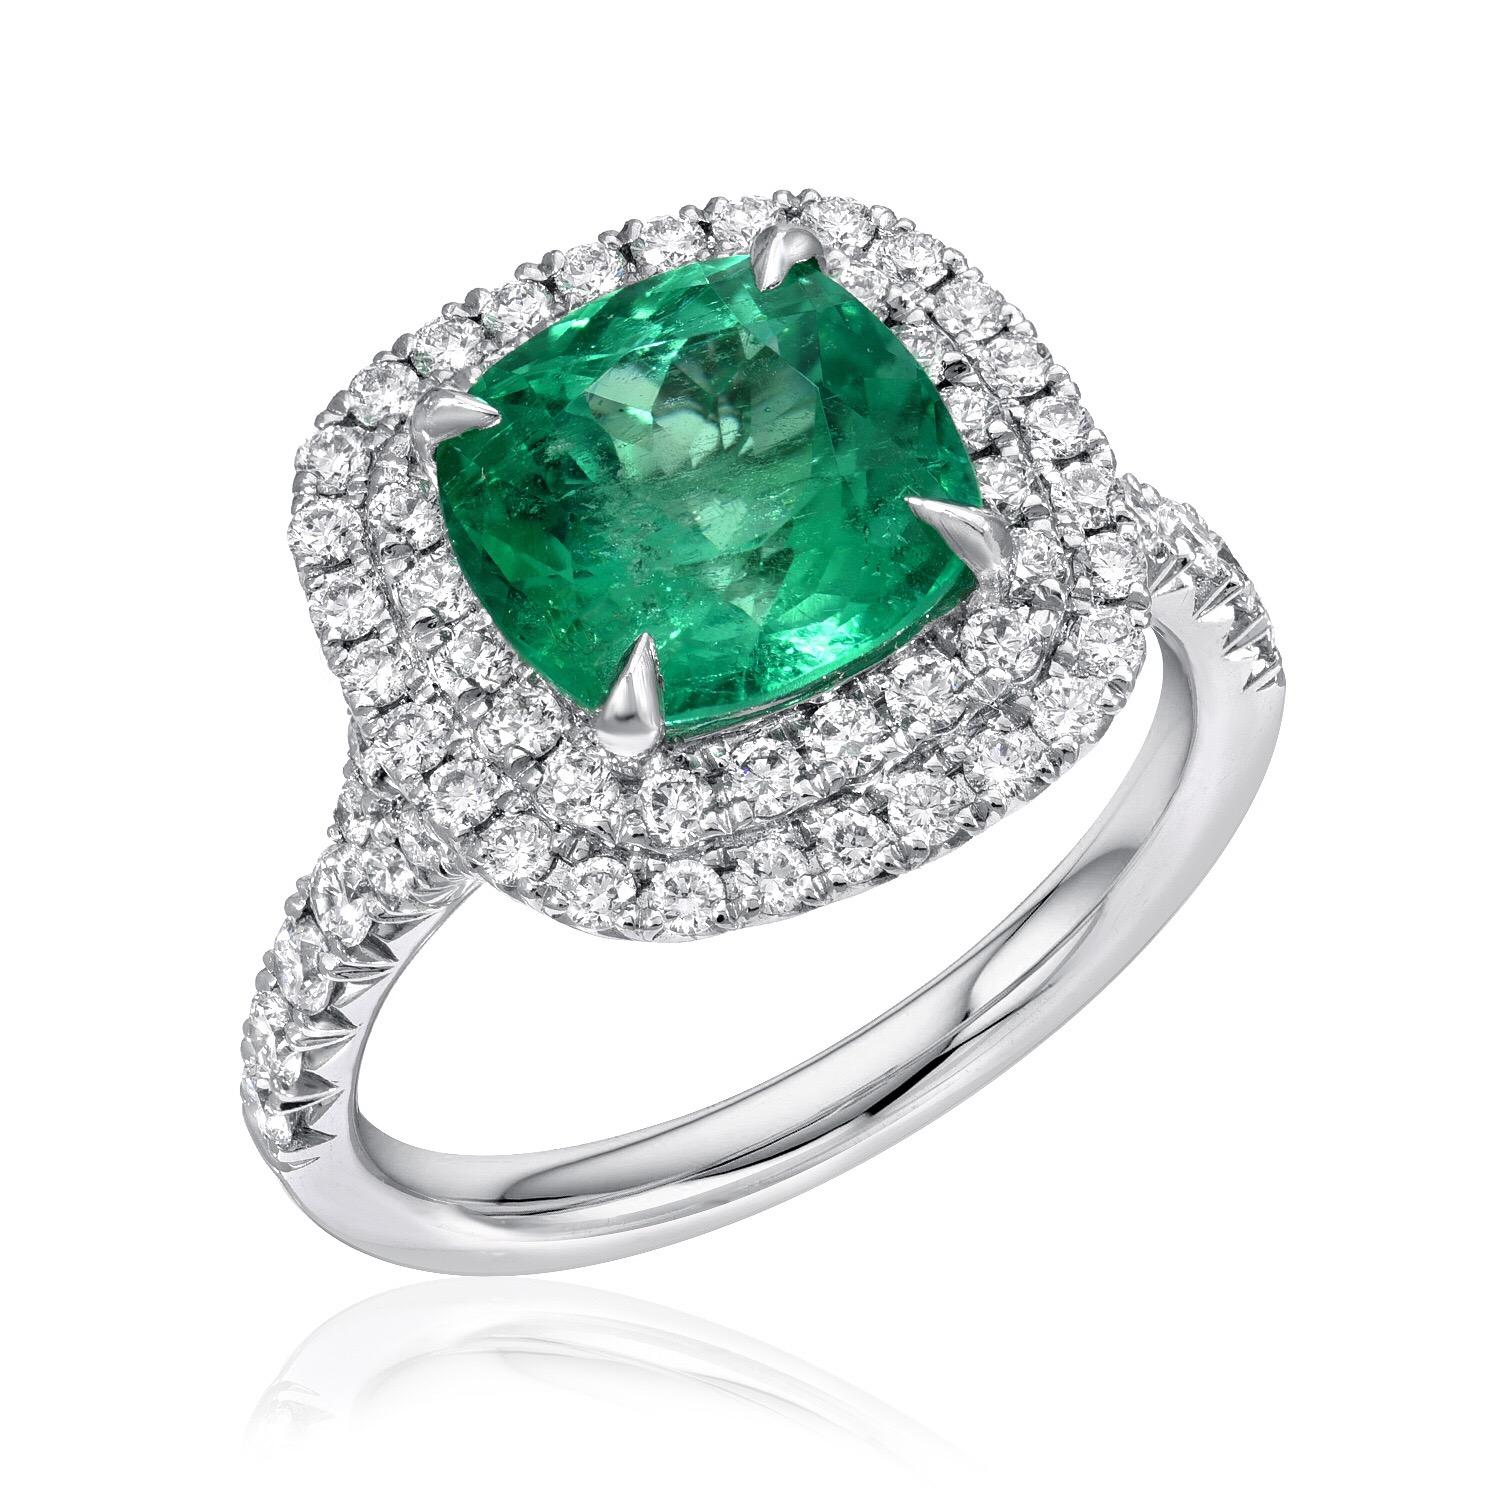 Colombian Emerald ring featuring a 2.82 carat cushion cut Emerald, surrounded by round brilliant micro pave diamonds weighing a total of 0.79 carats, in an 18K white gold engagement ring.
Ring size 6.5. Re-sizing is complimentary upon